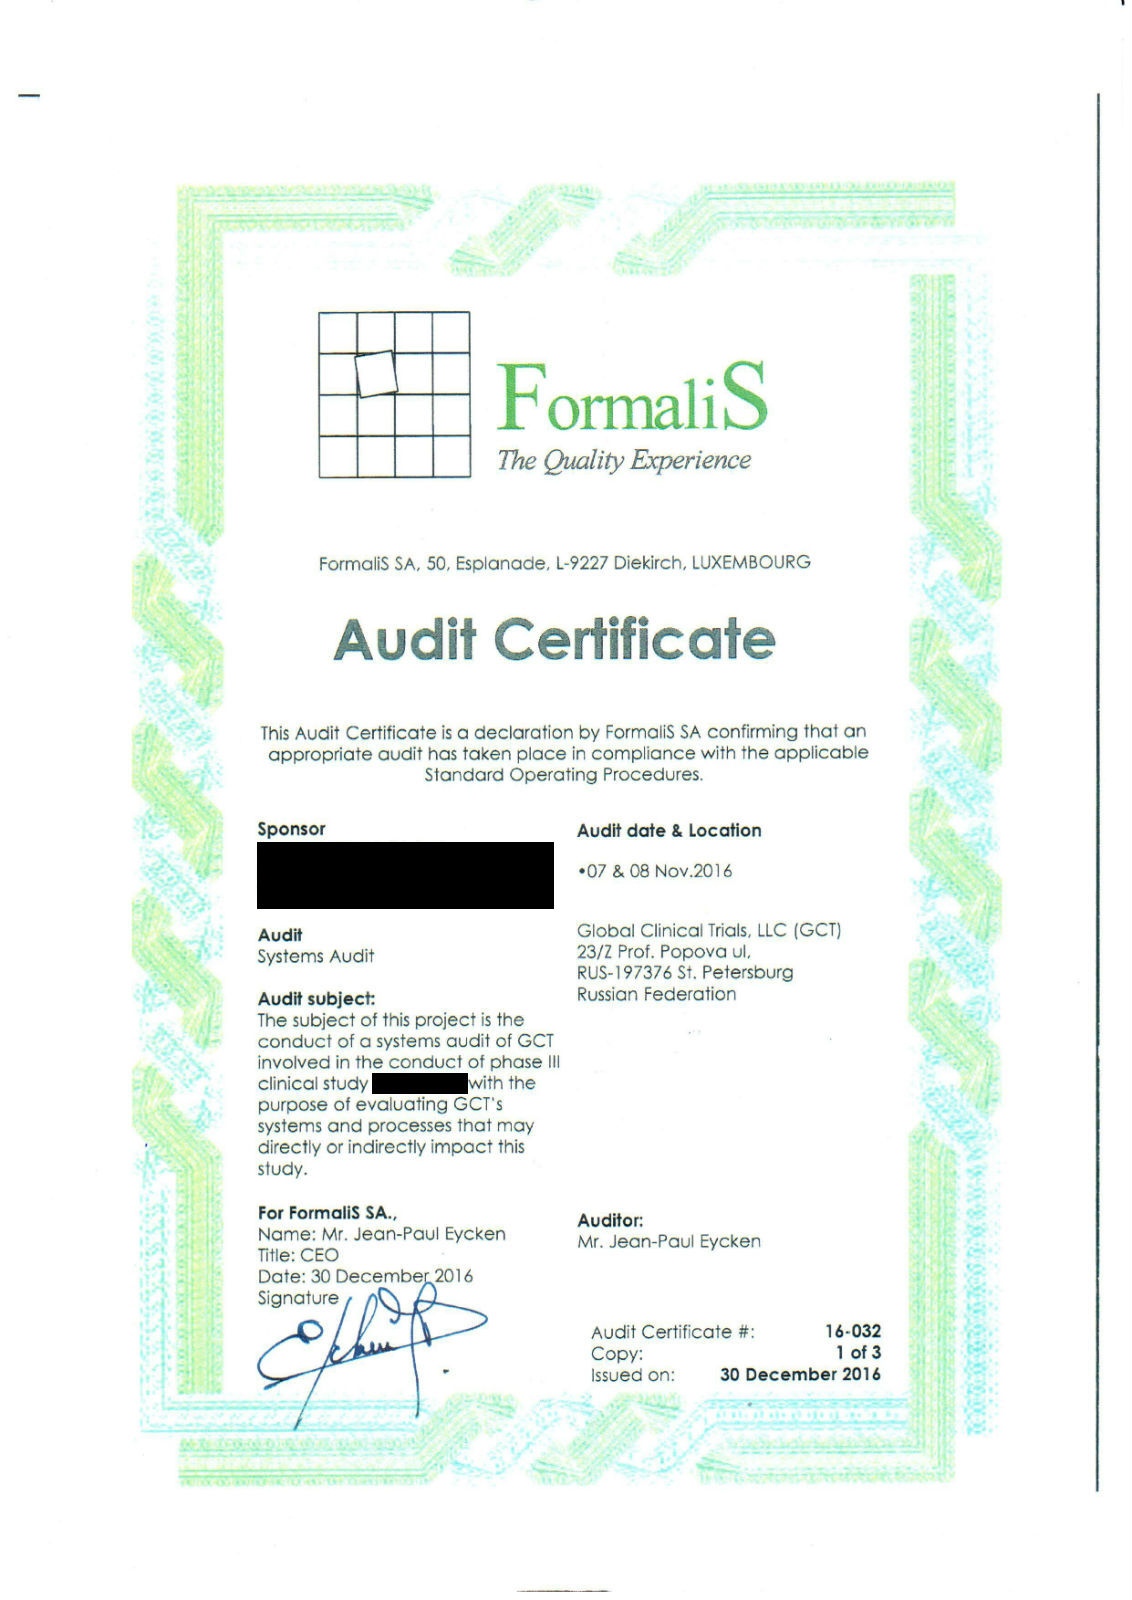 GCT has passed an audit by Formalis duting Phase III study